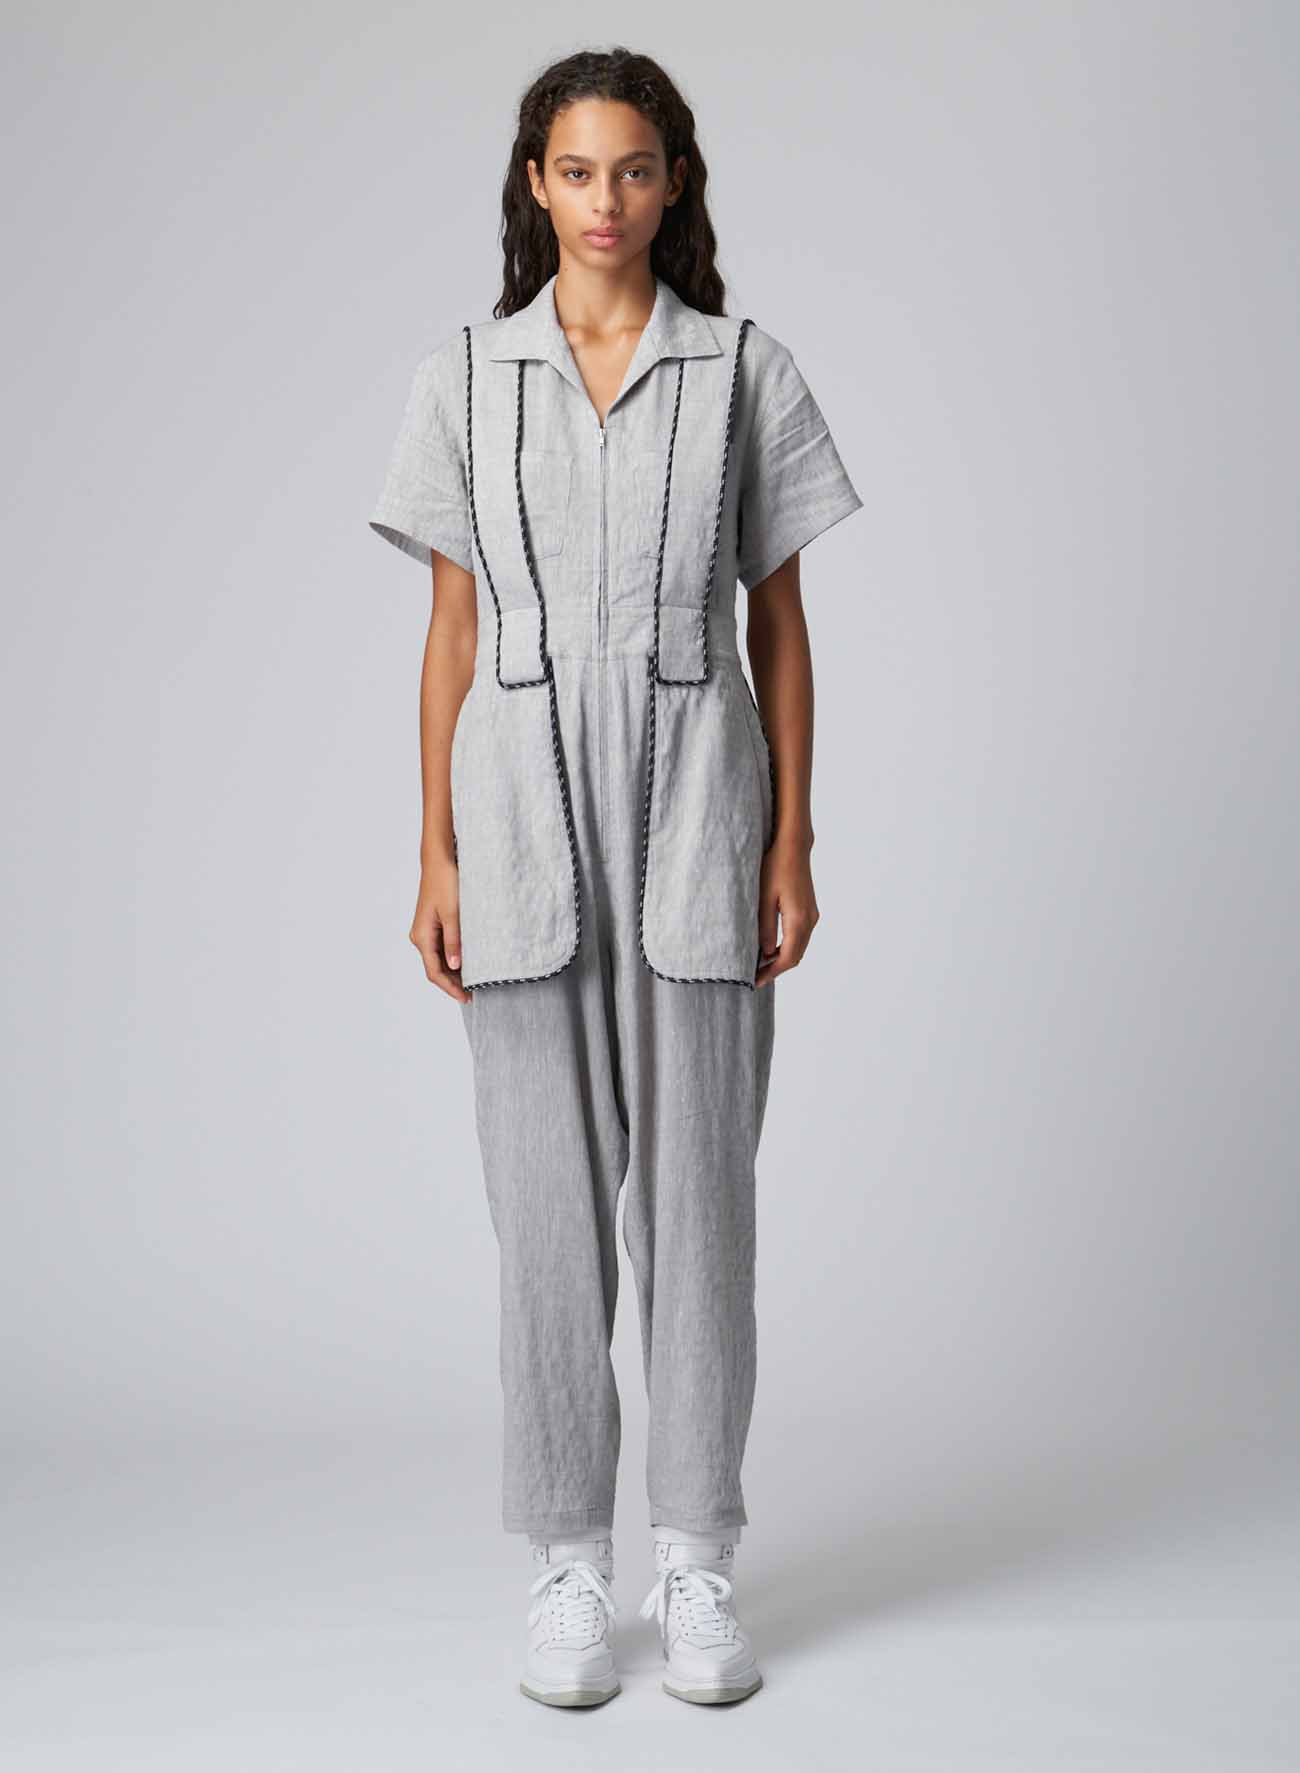 BREATHABLE LINEN/RAYON JUMPSUIT WITH MULTIPLE POCKETS